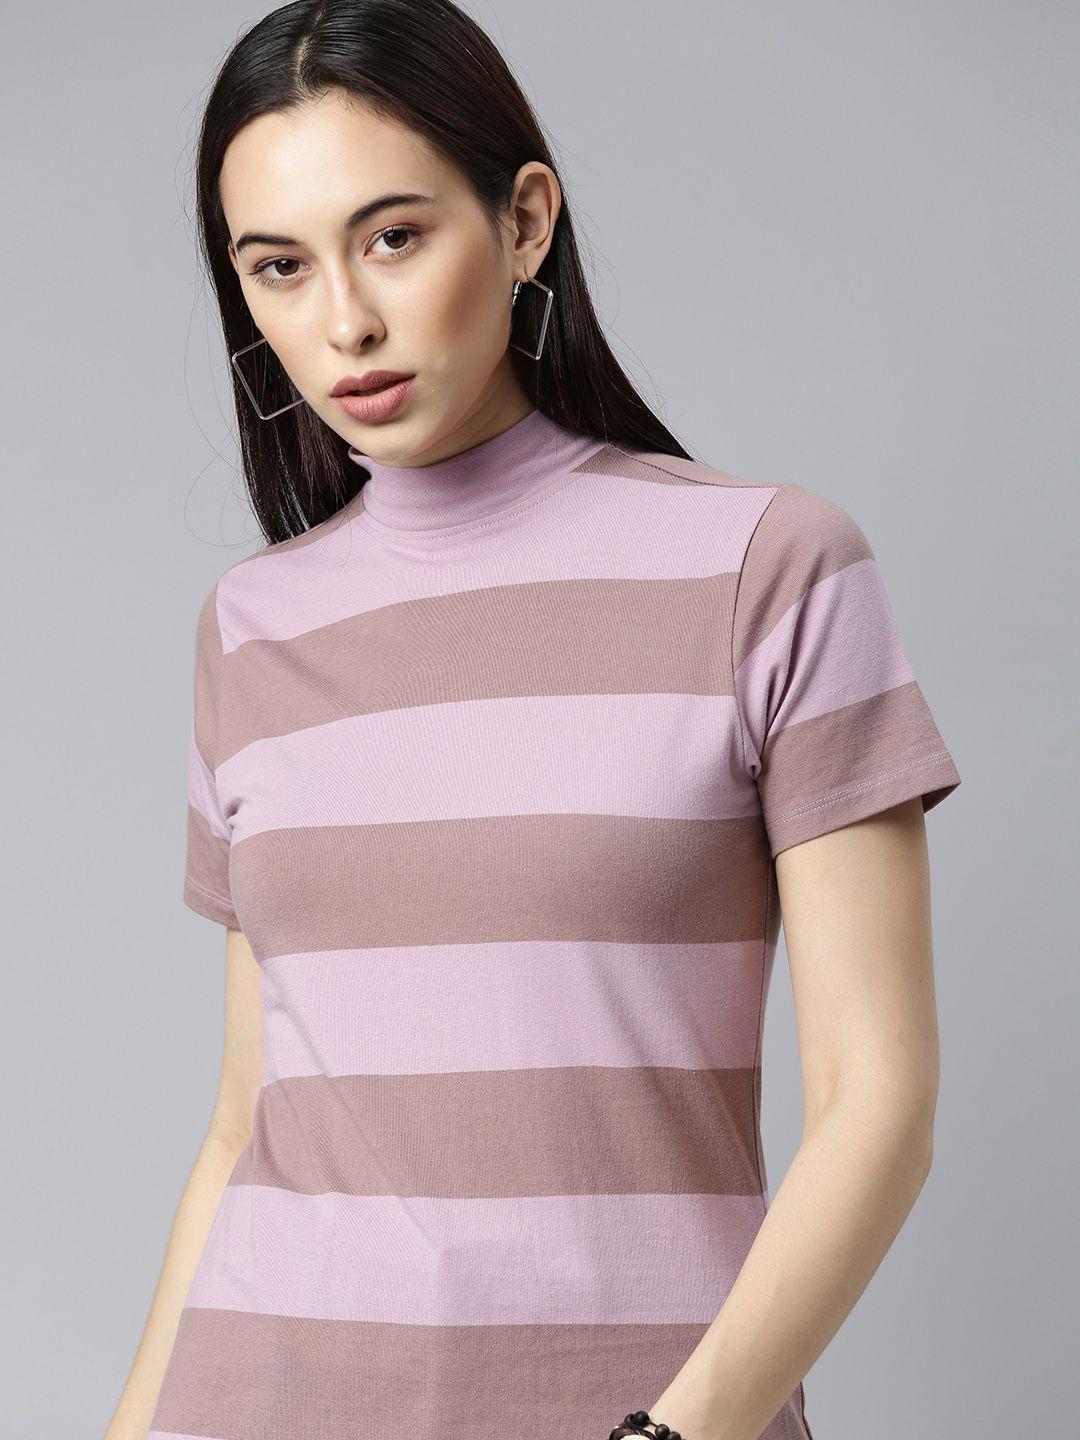 the roadster lifestyle co women pink striped high neck t-shirt